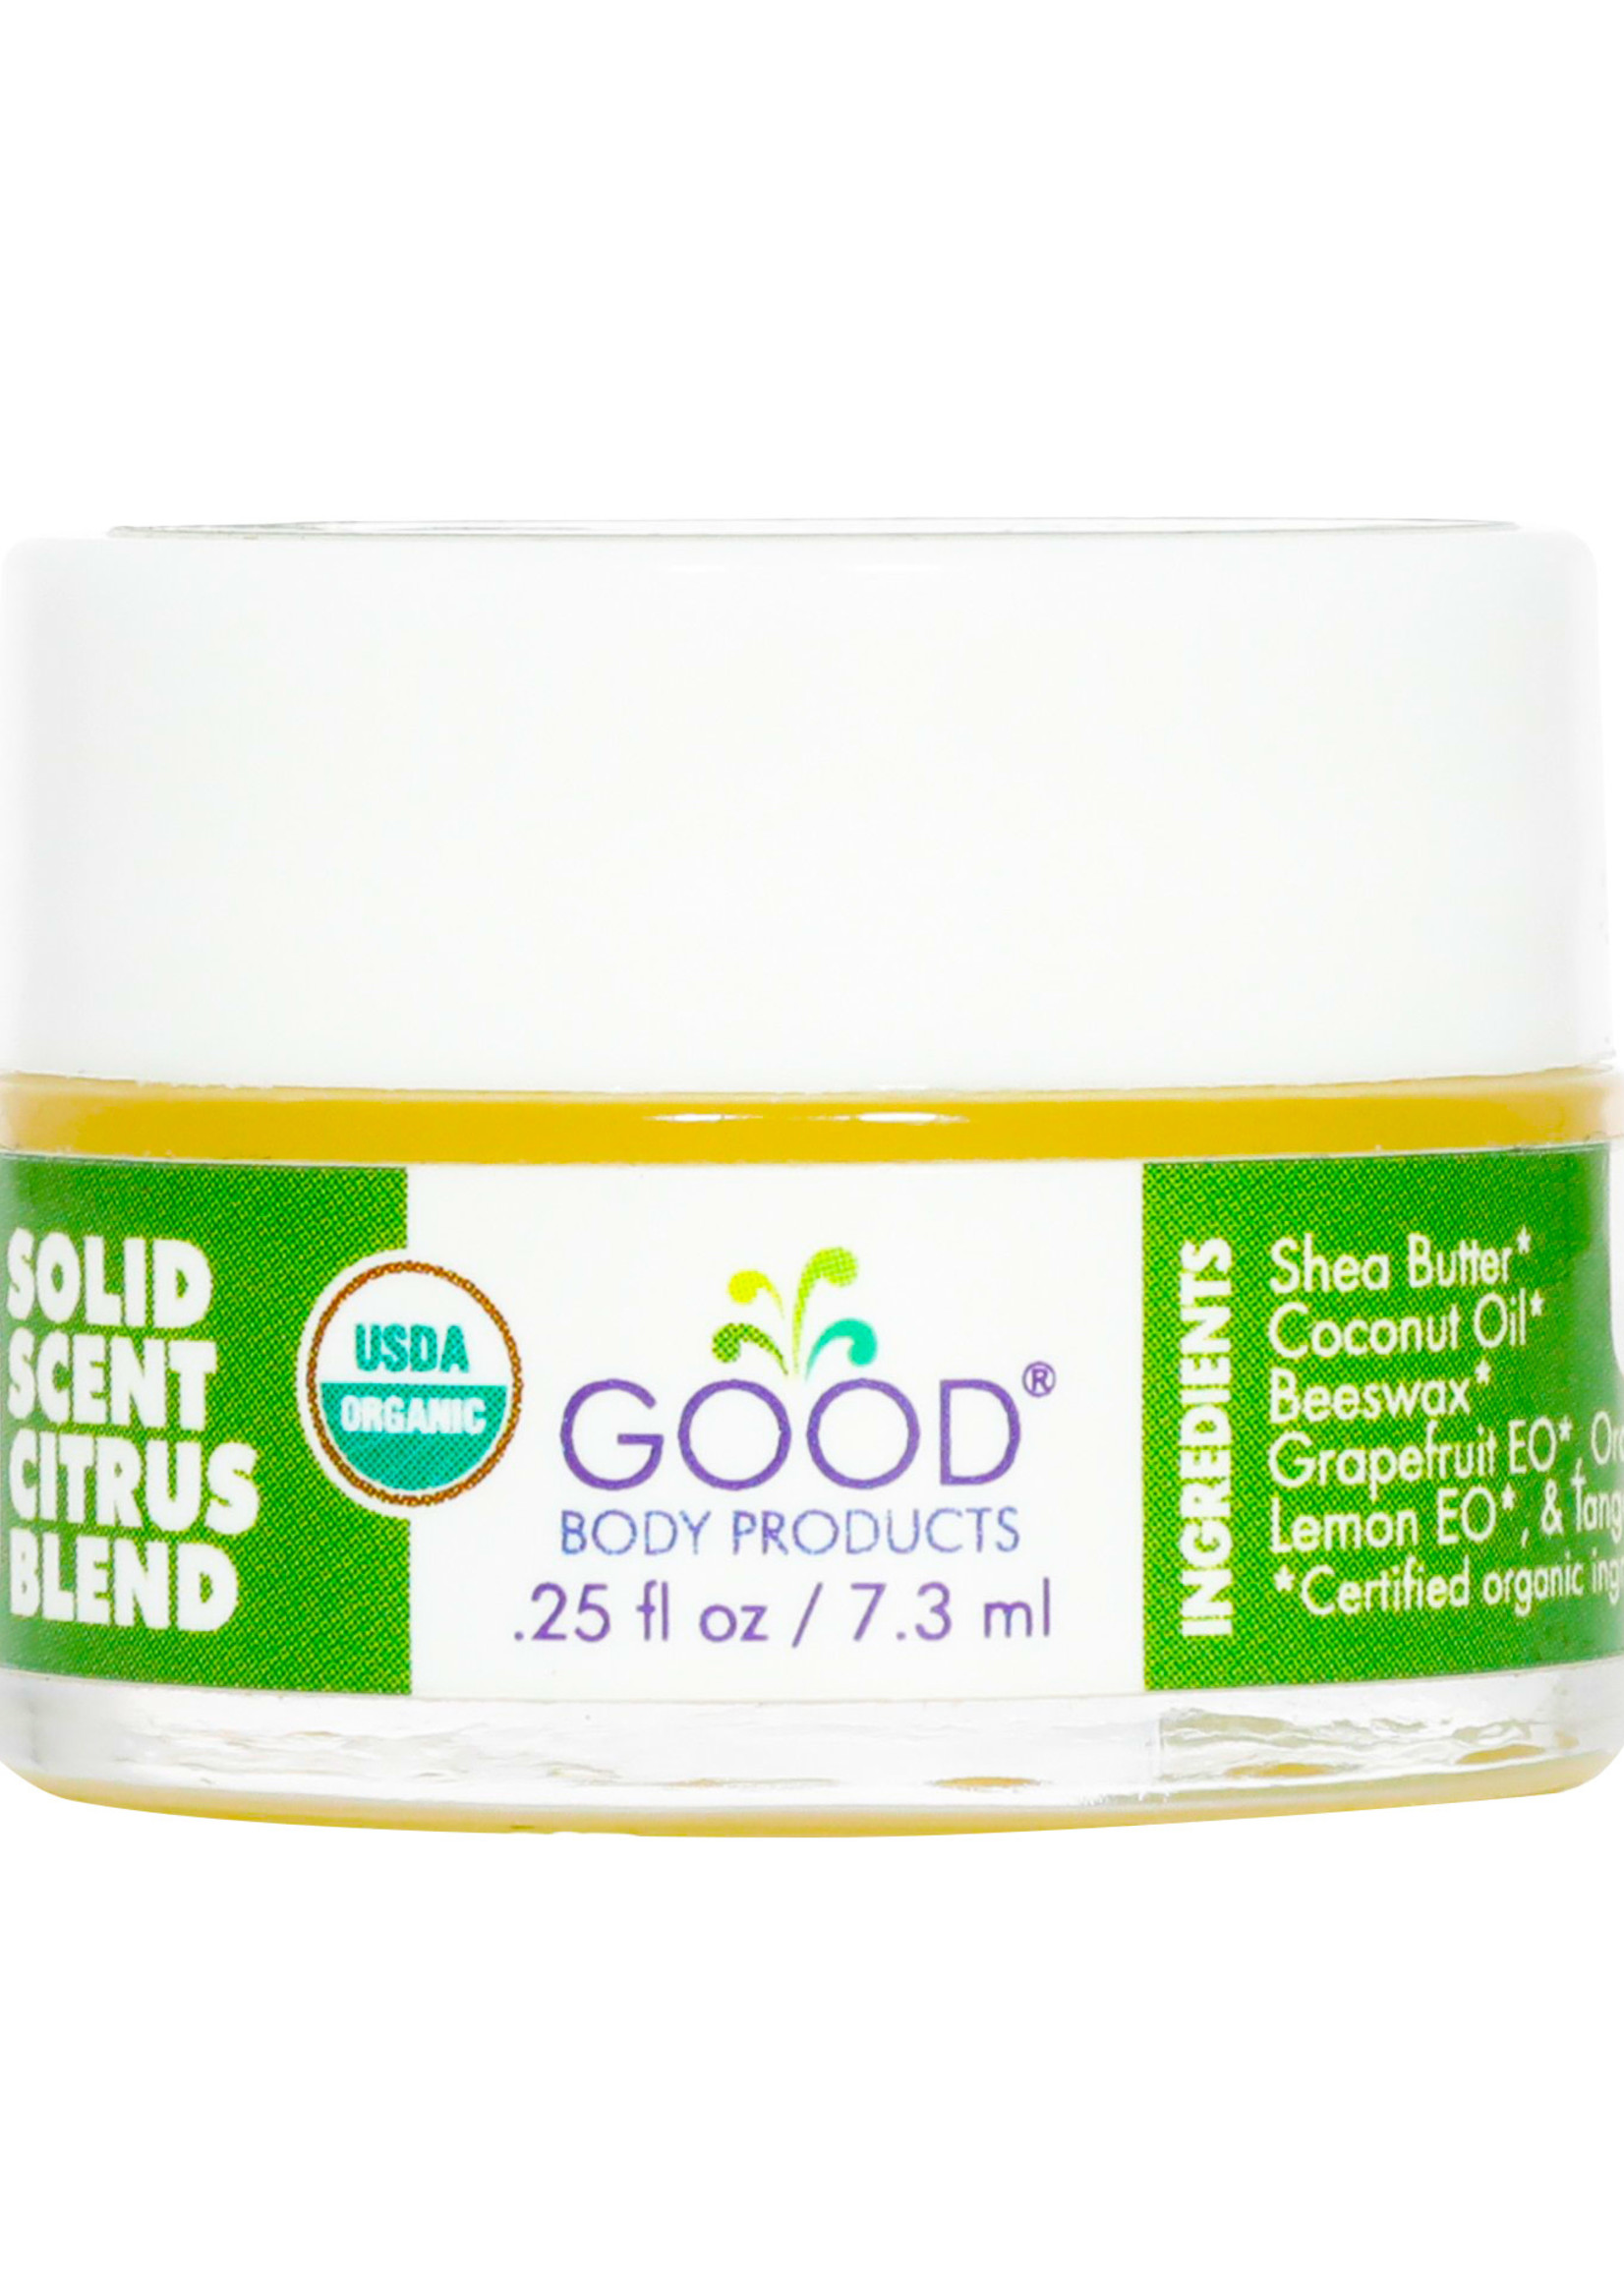 Good Body Products GBP, Citrus Blend Solid Scent, .25oz